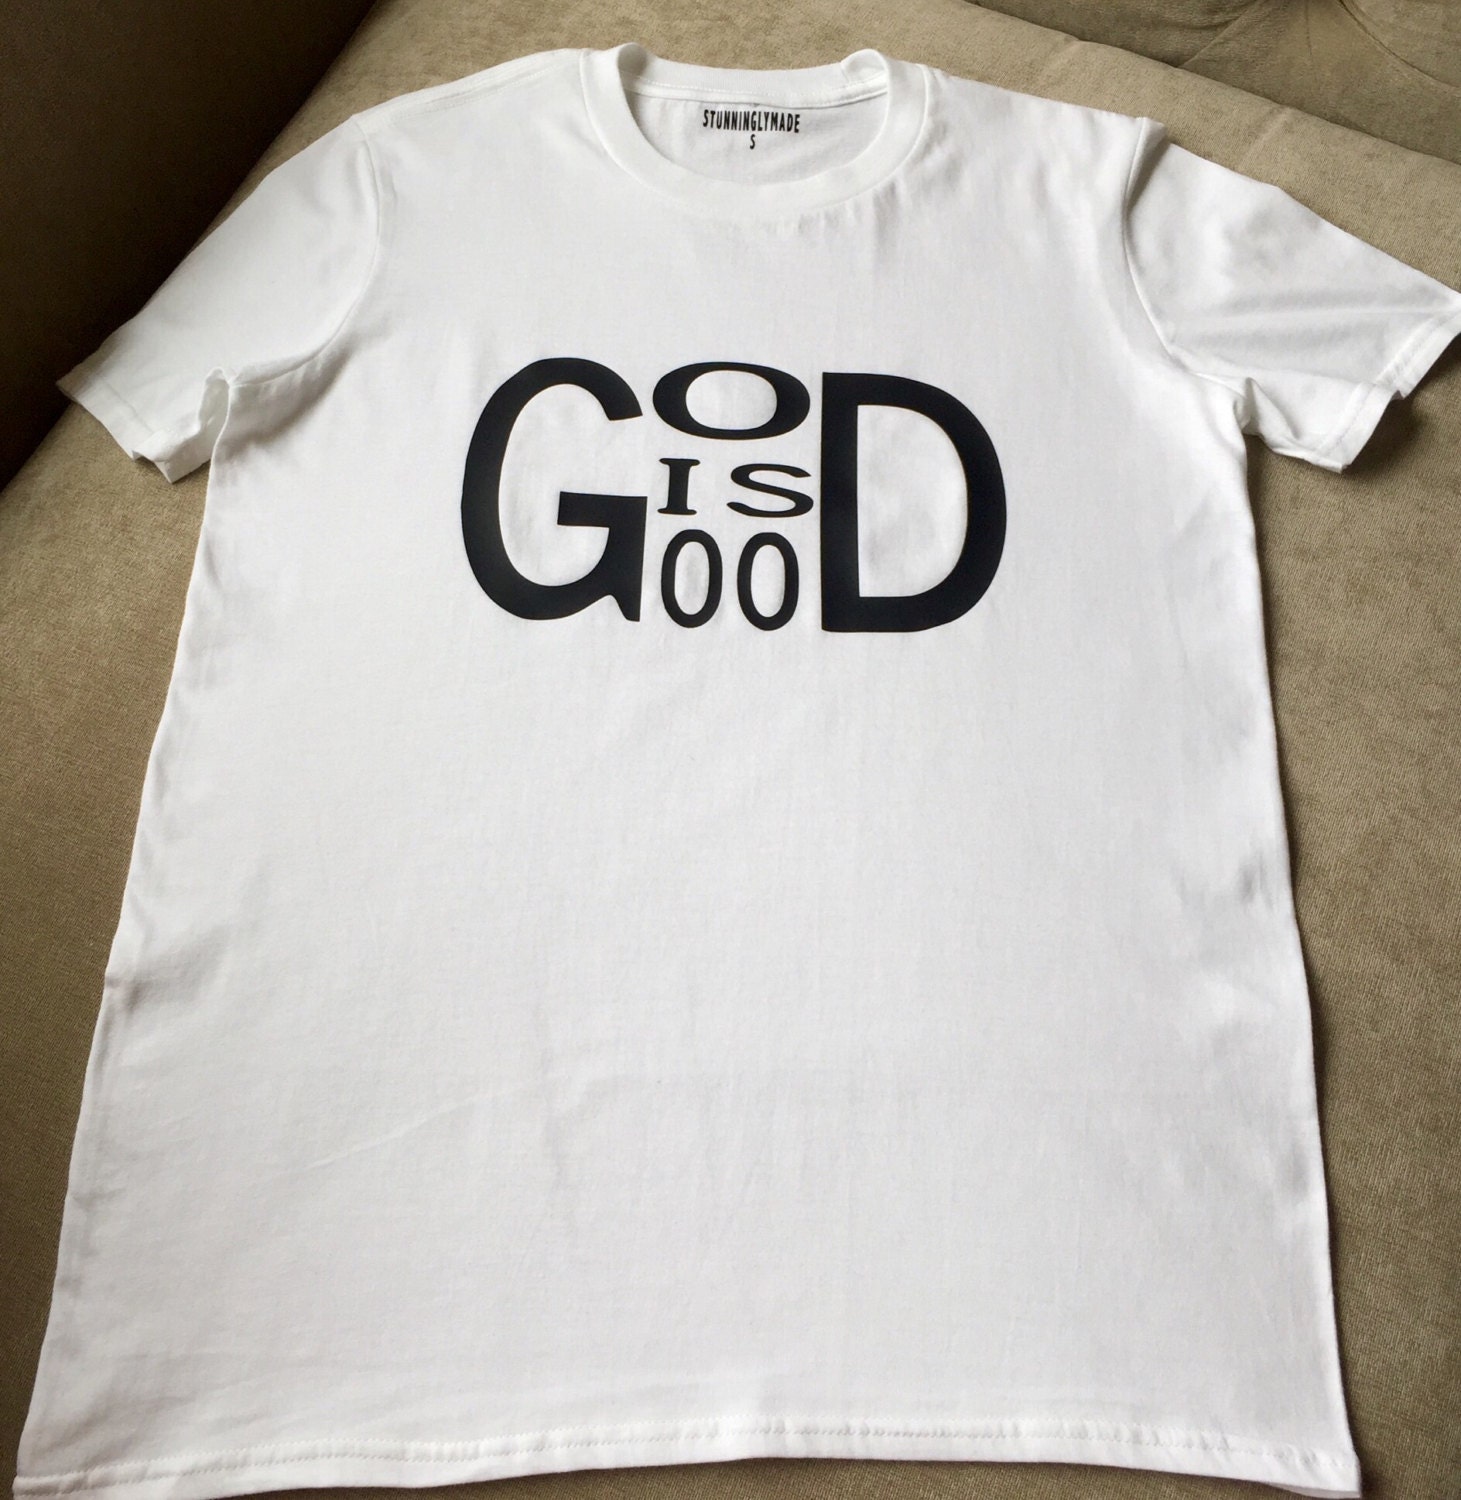 God Is Good Men's Cotton T-Shirt by StunninglyMade on Etsy